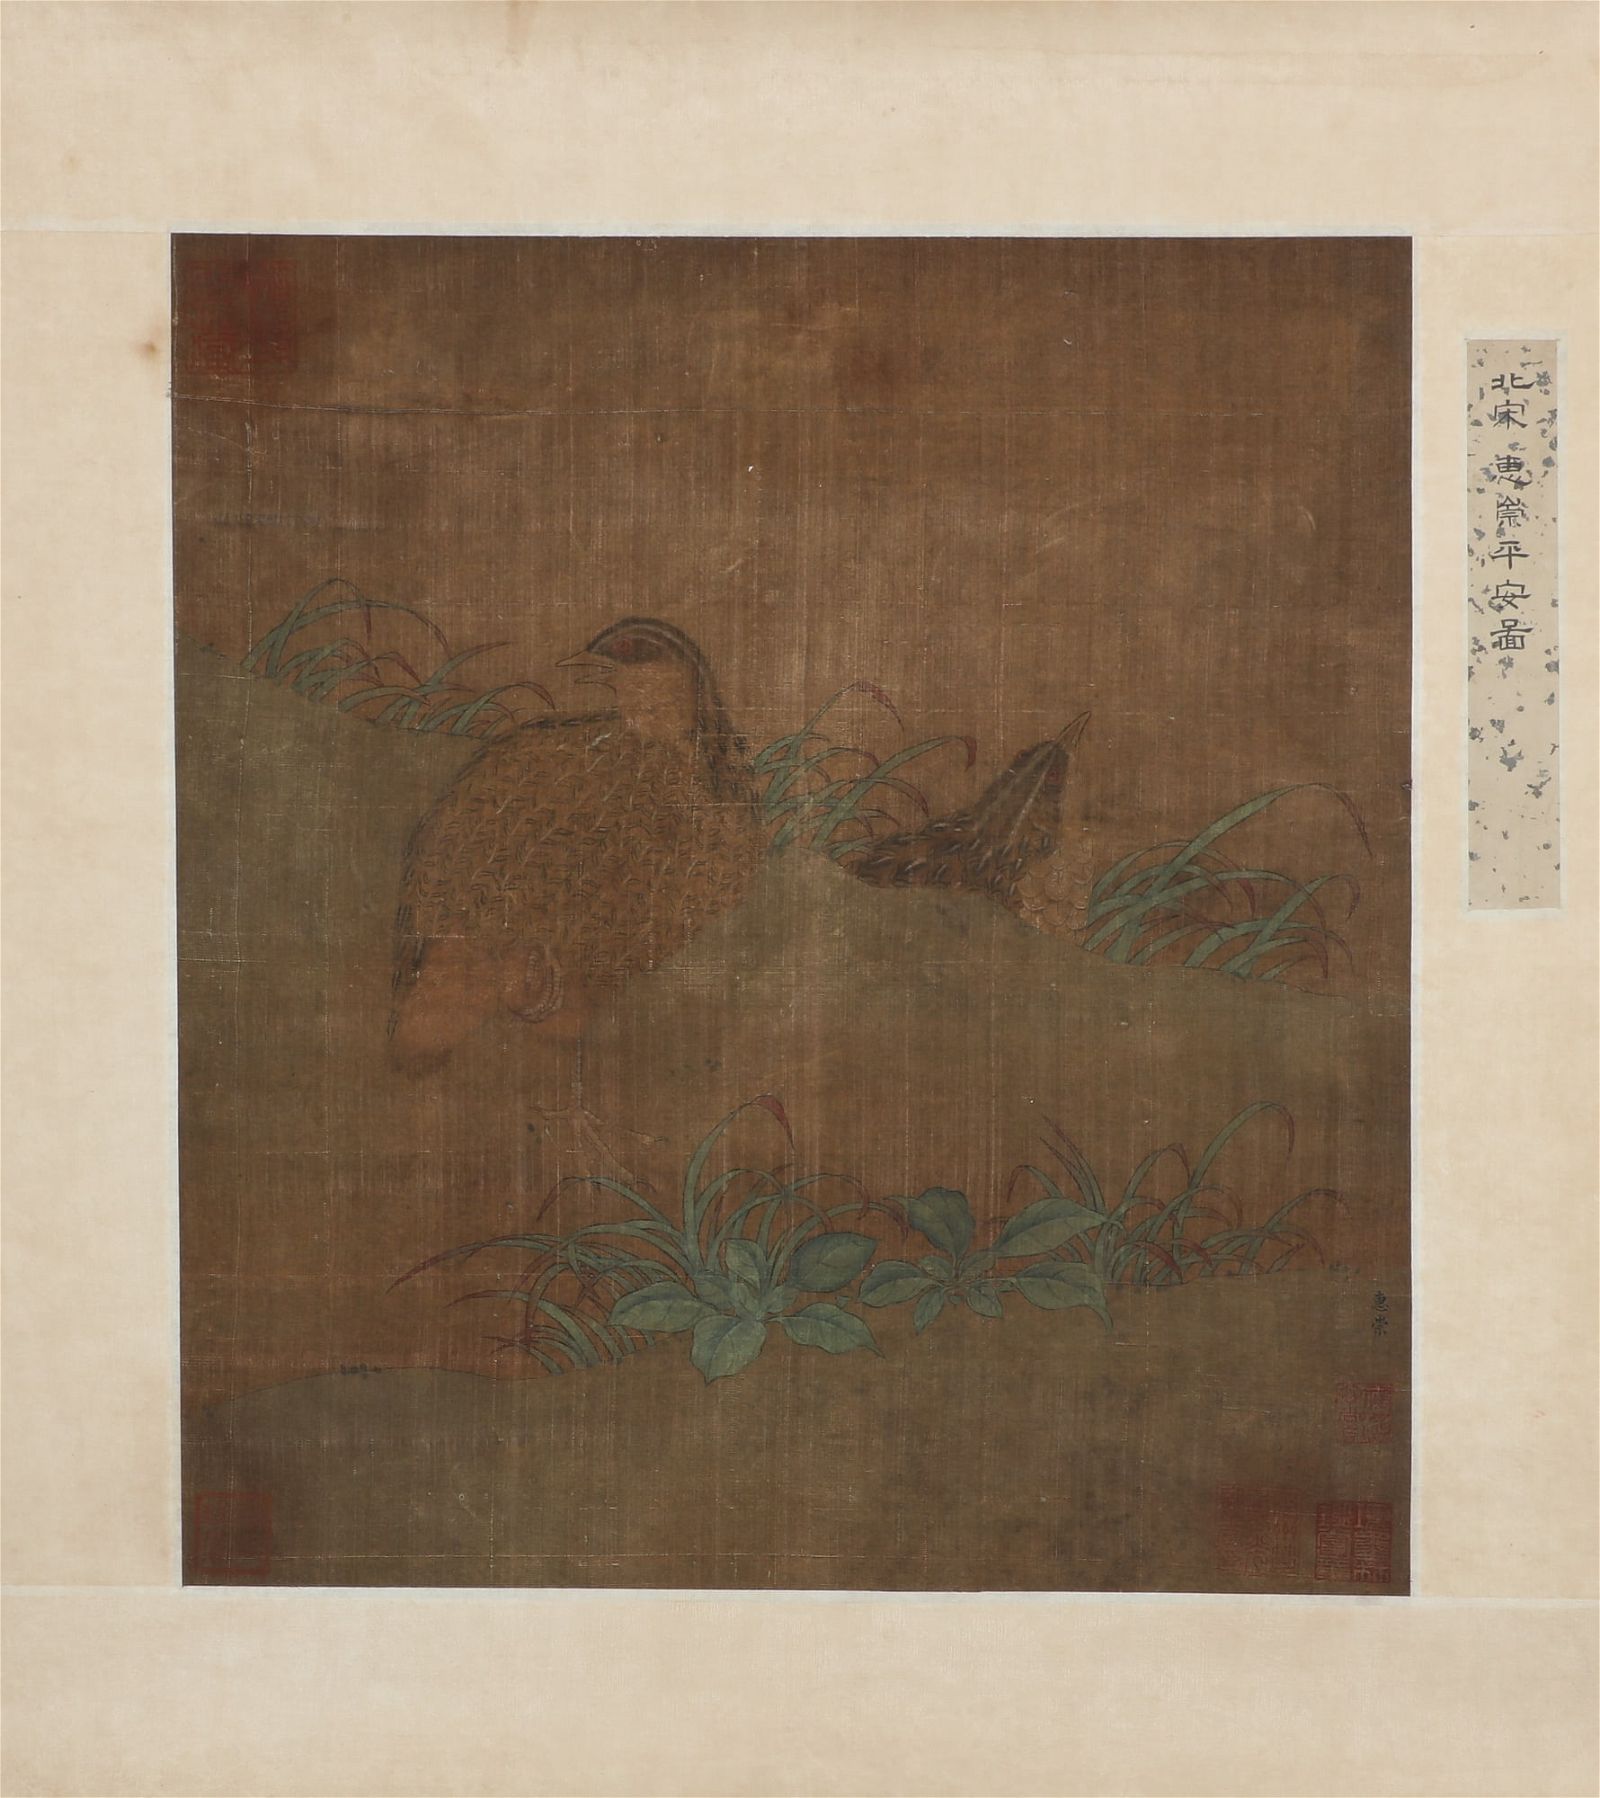 A CHINESE PAINTING ON SILK OF QUAILA 2fb2fe4